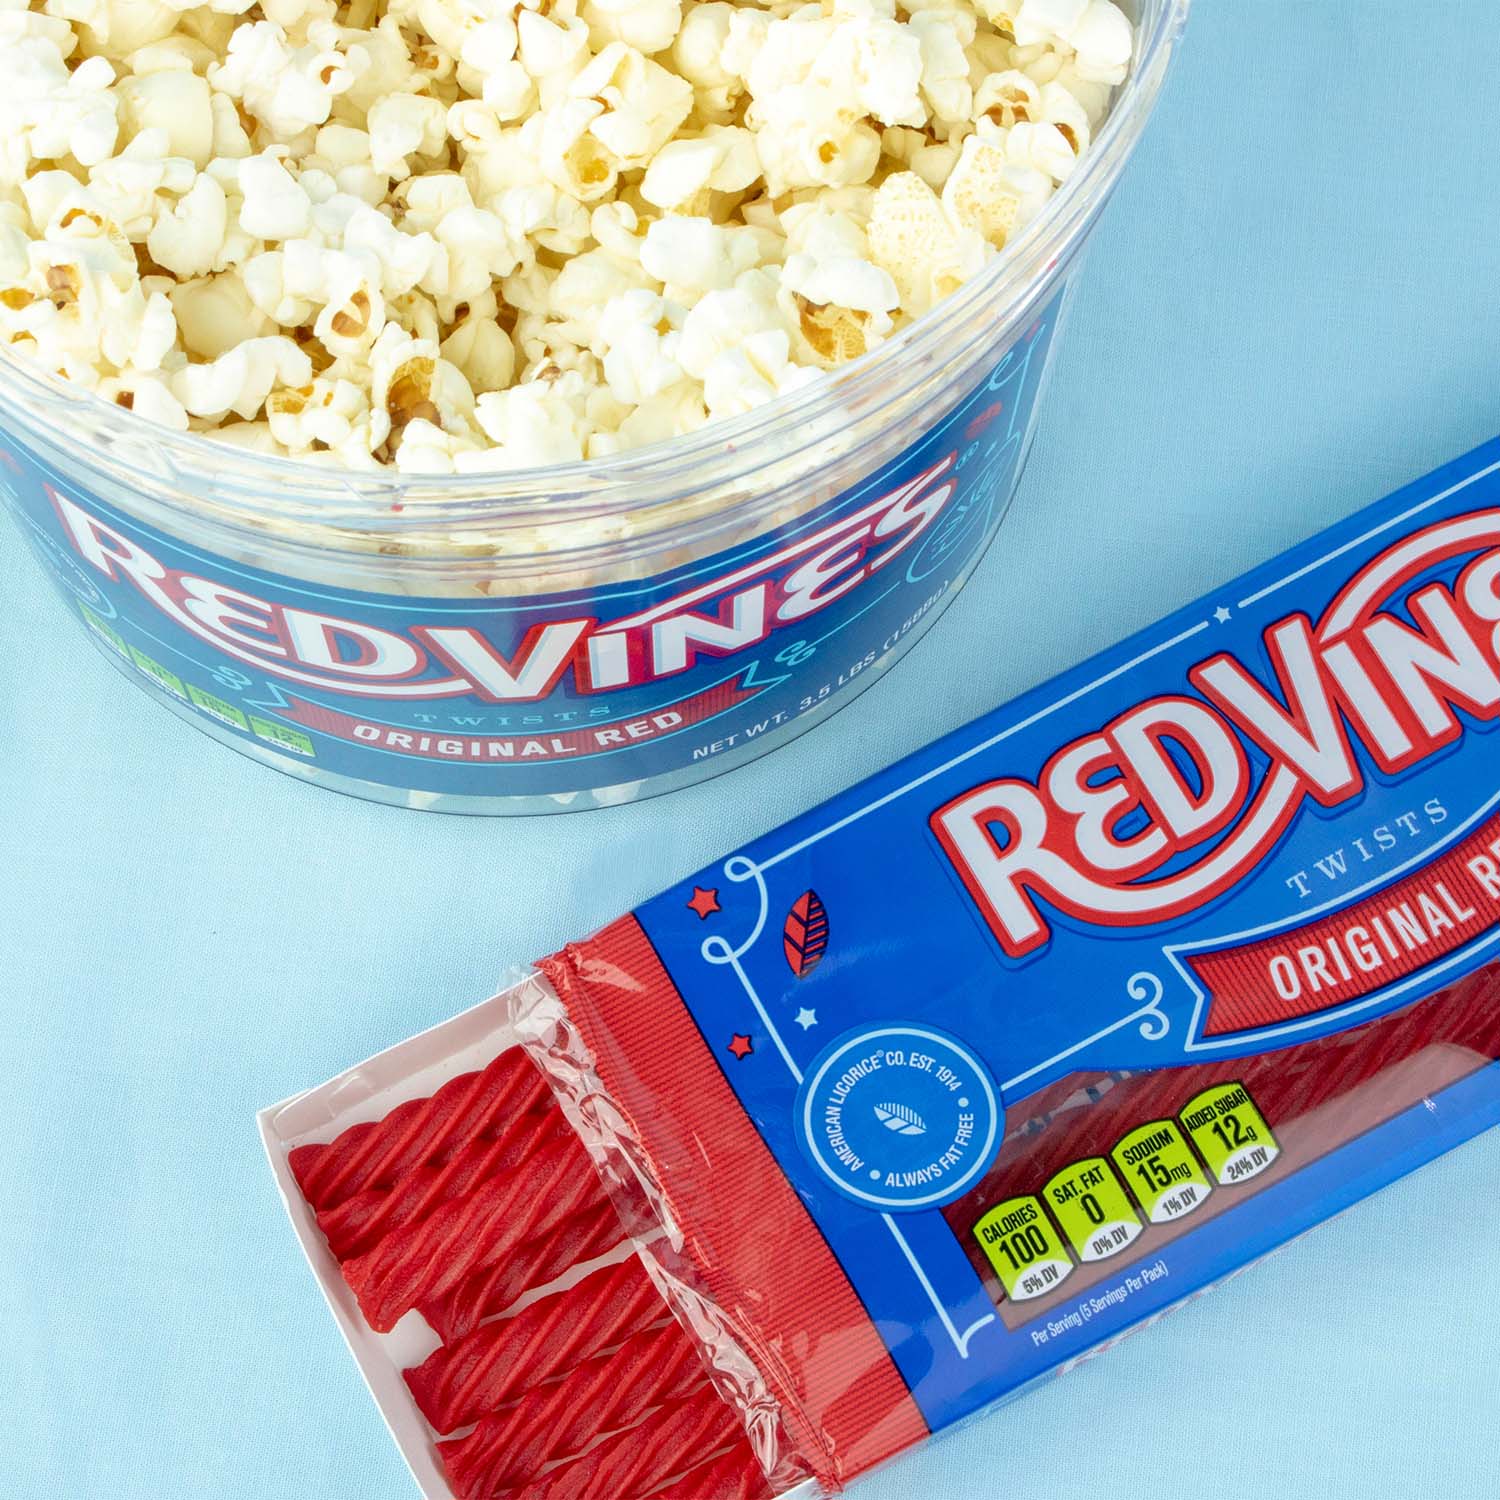 Red Vines Original Red Twists paired with salty popcorn